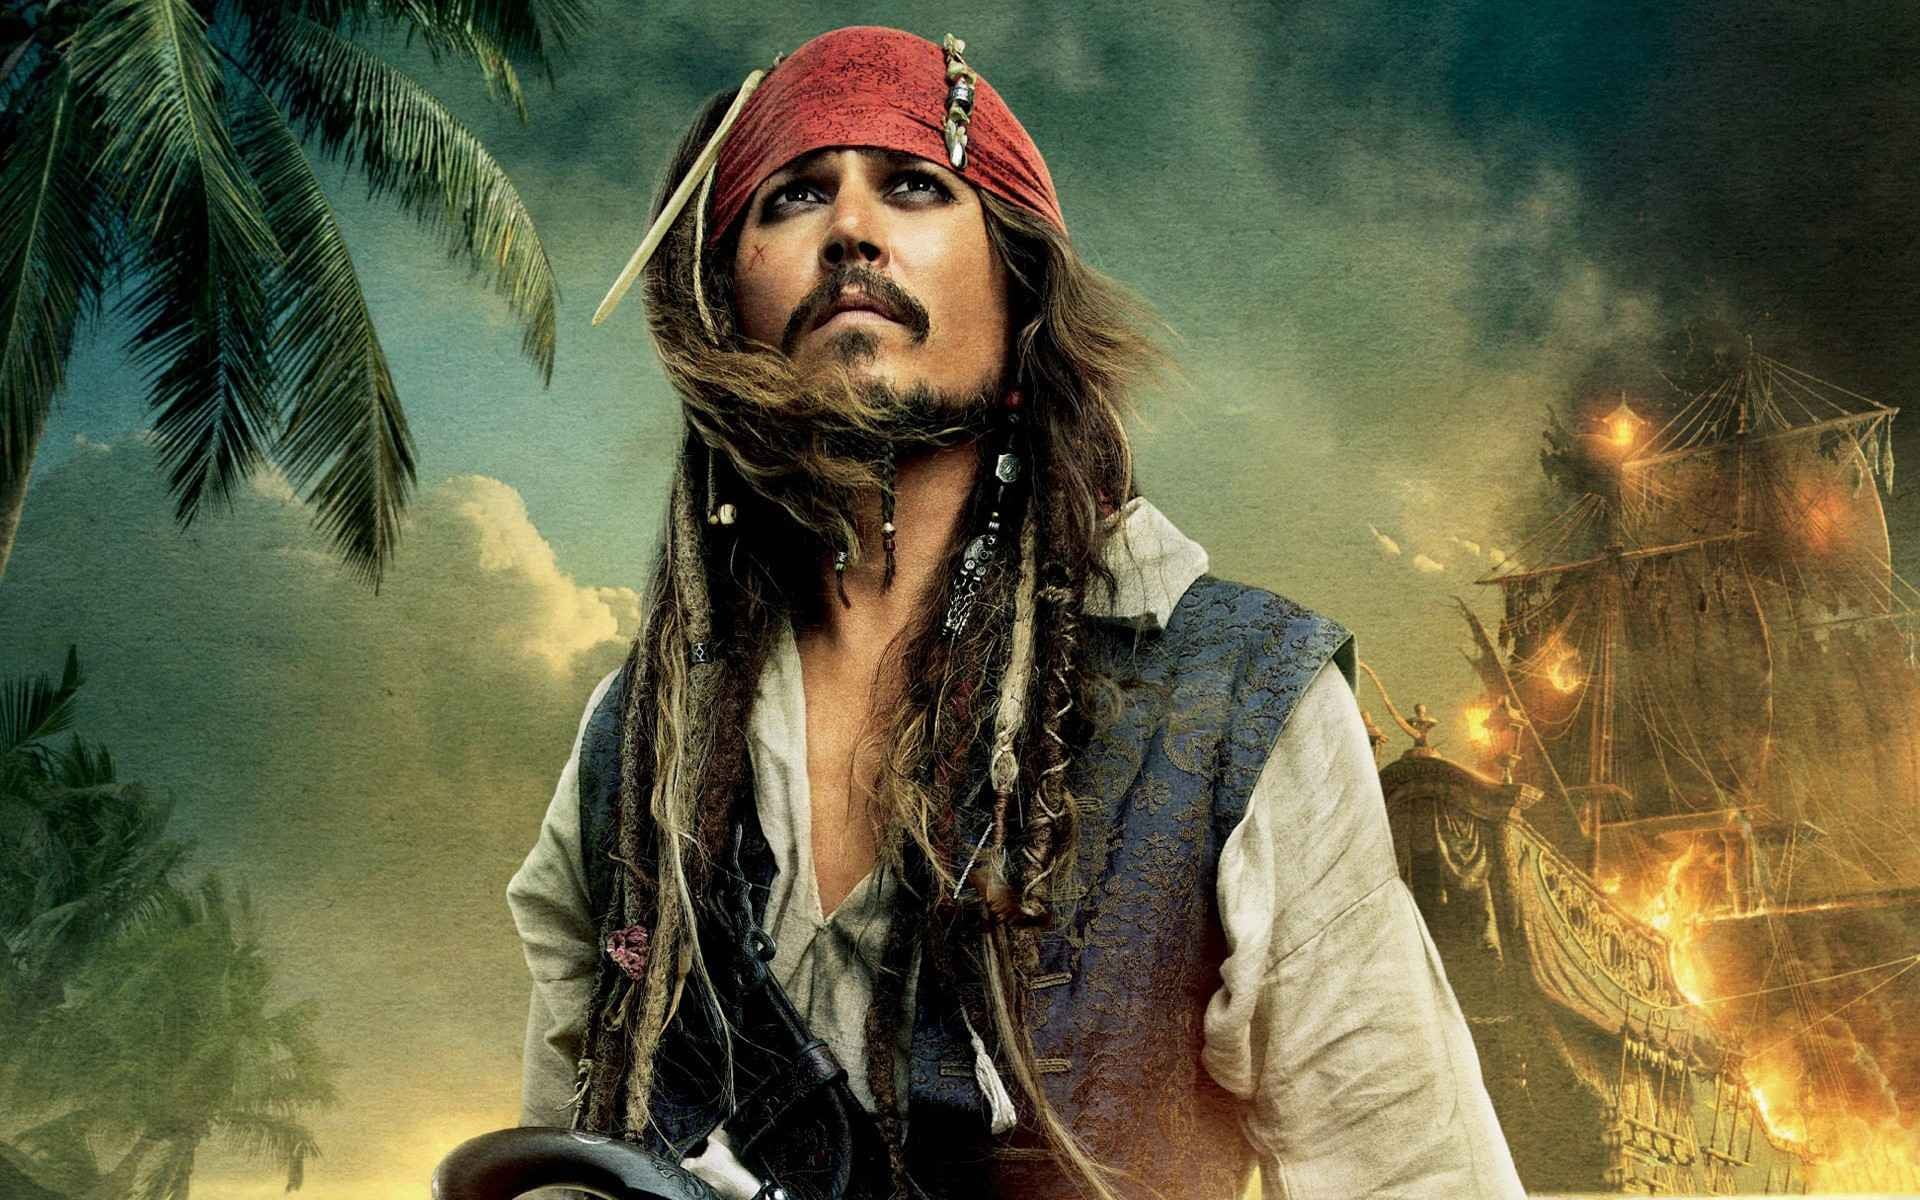 Pirates of the Caribbean Johnny Depp, movies, one person, young adult